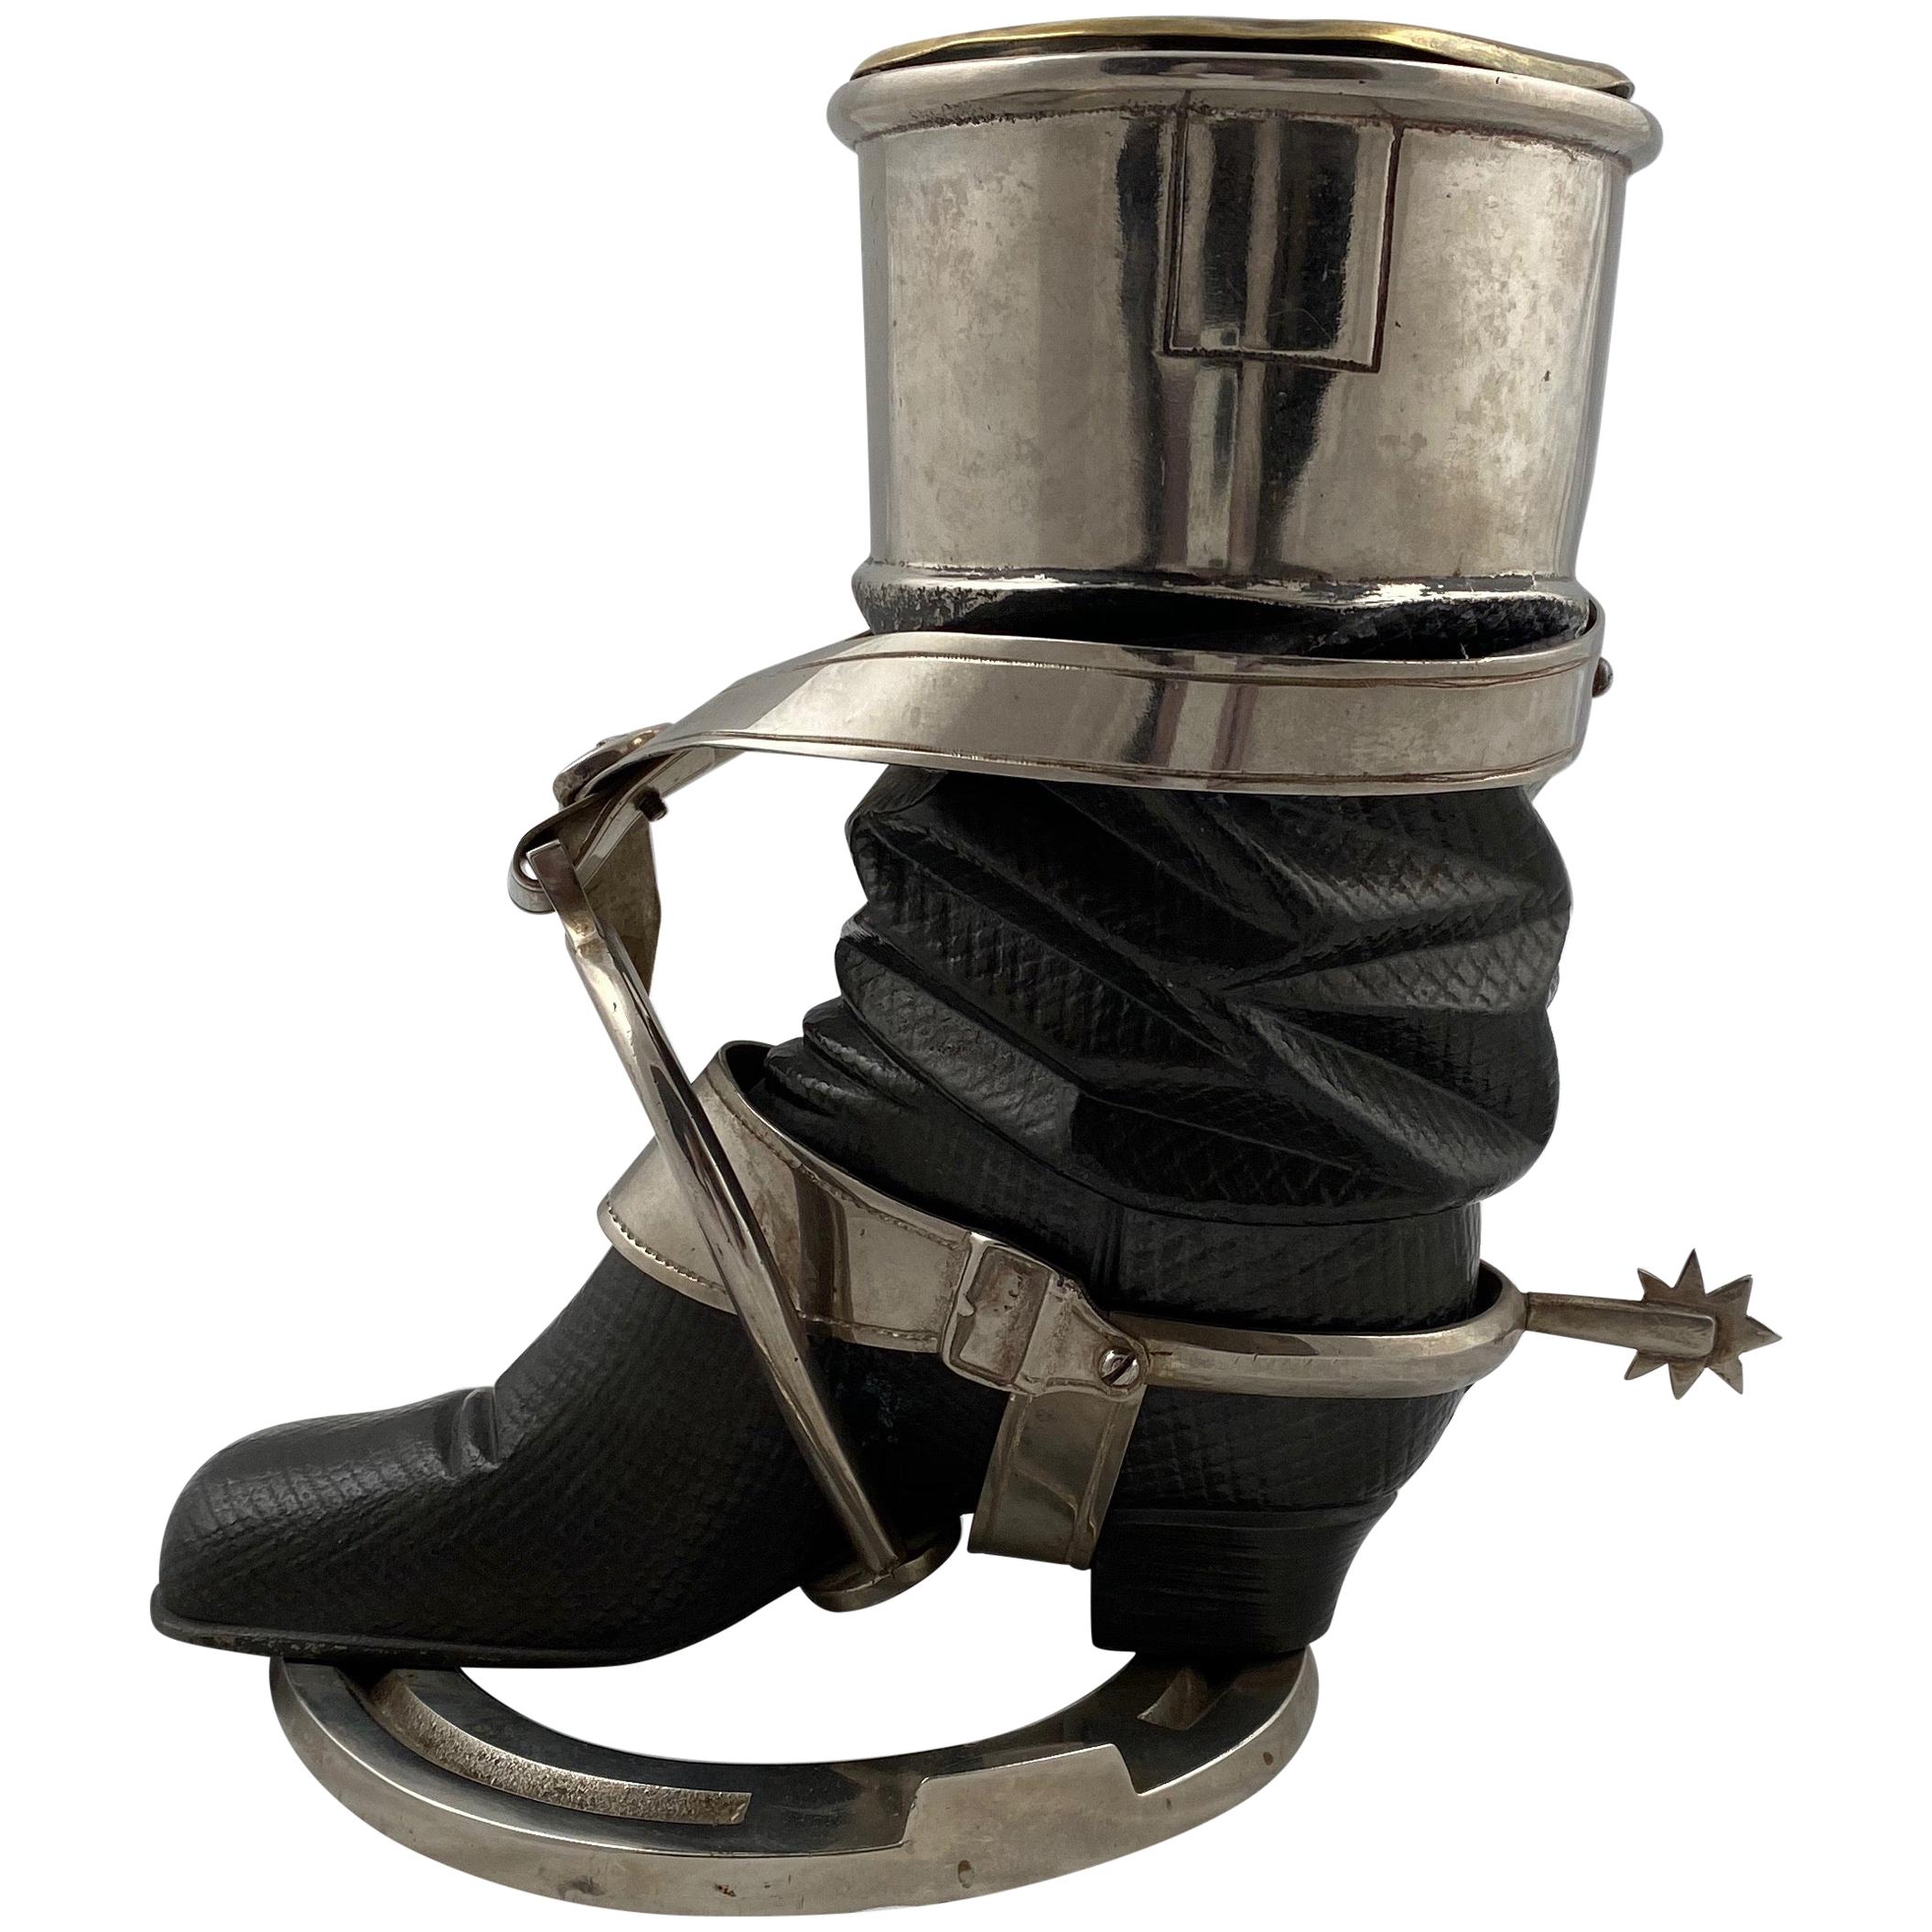 Penholder in the Shape of a Boot, 19th Century